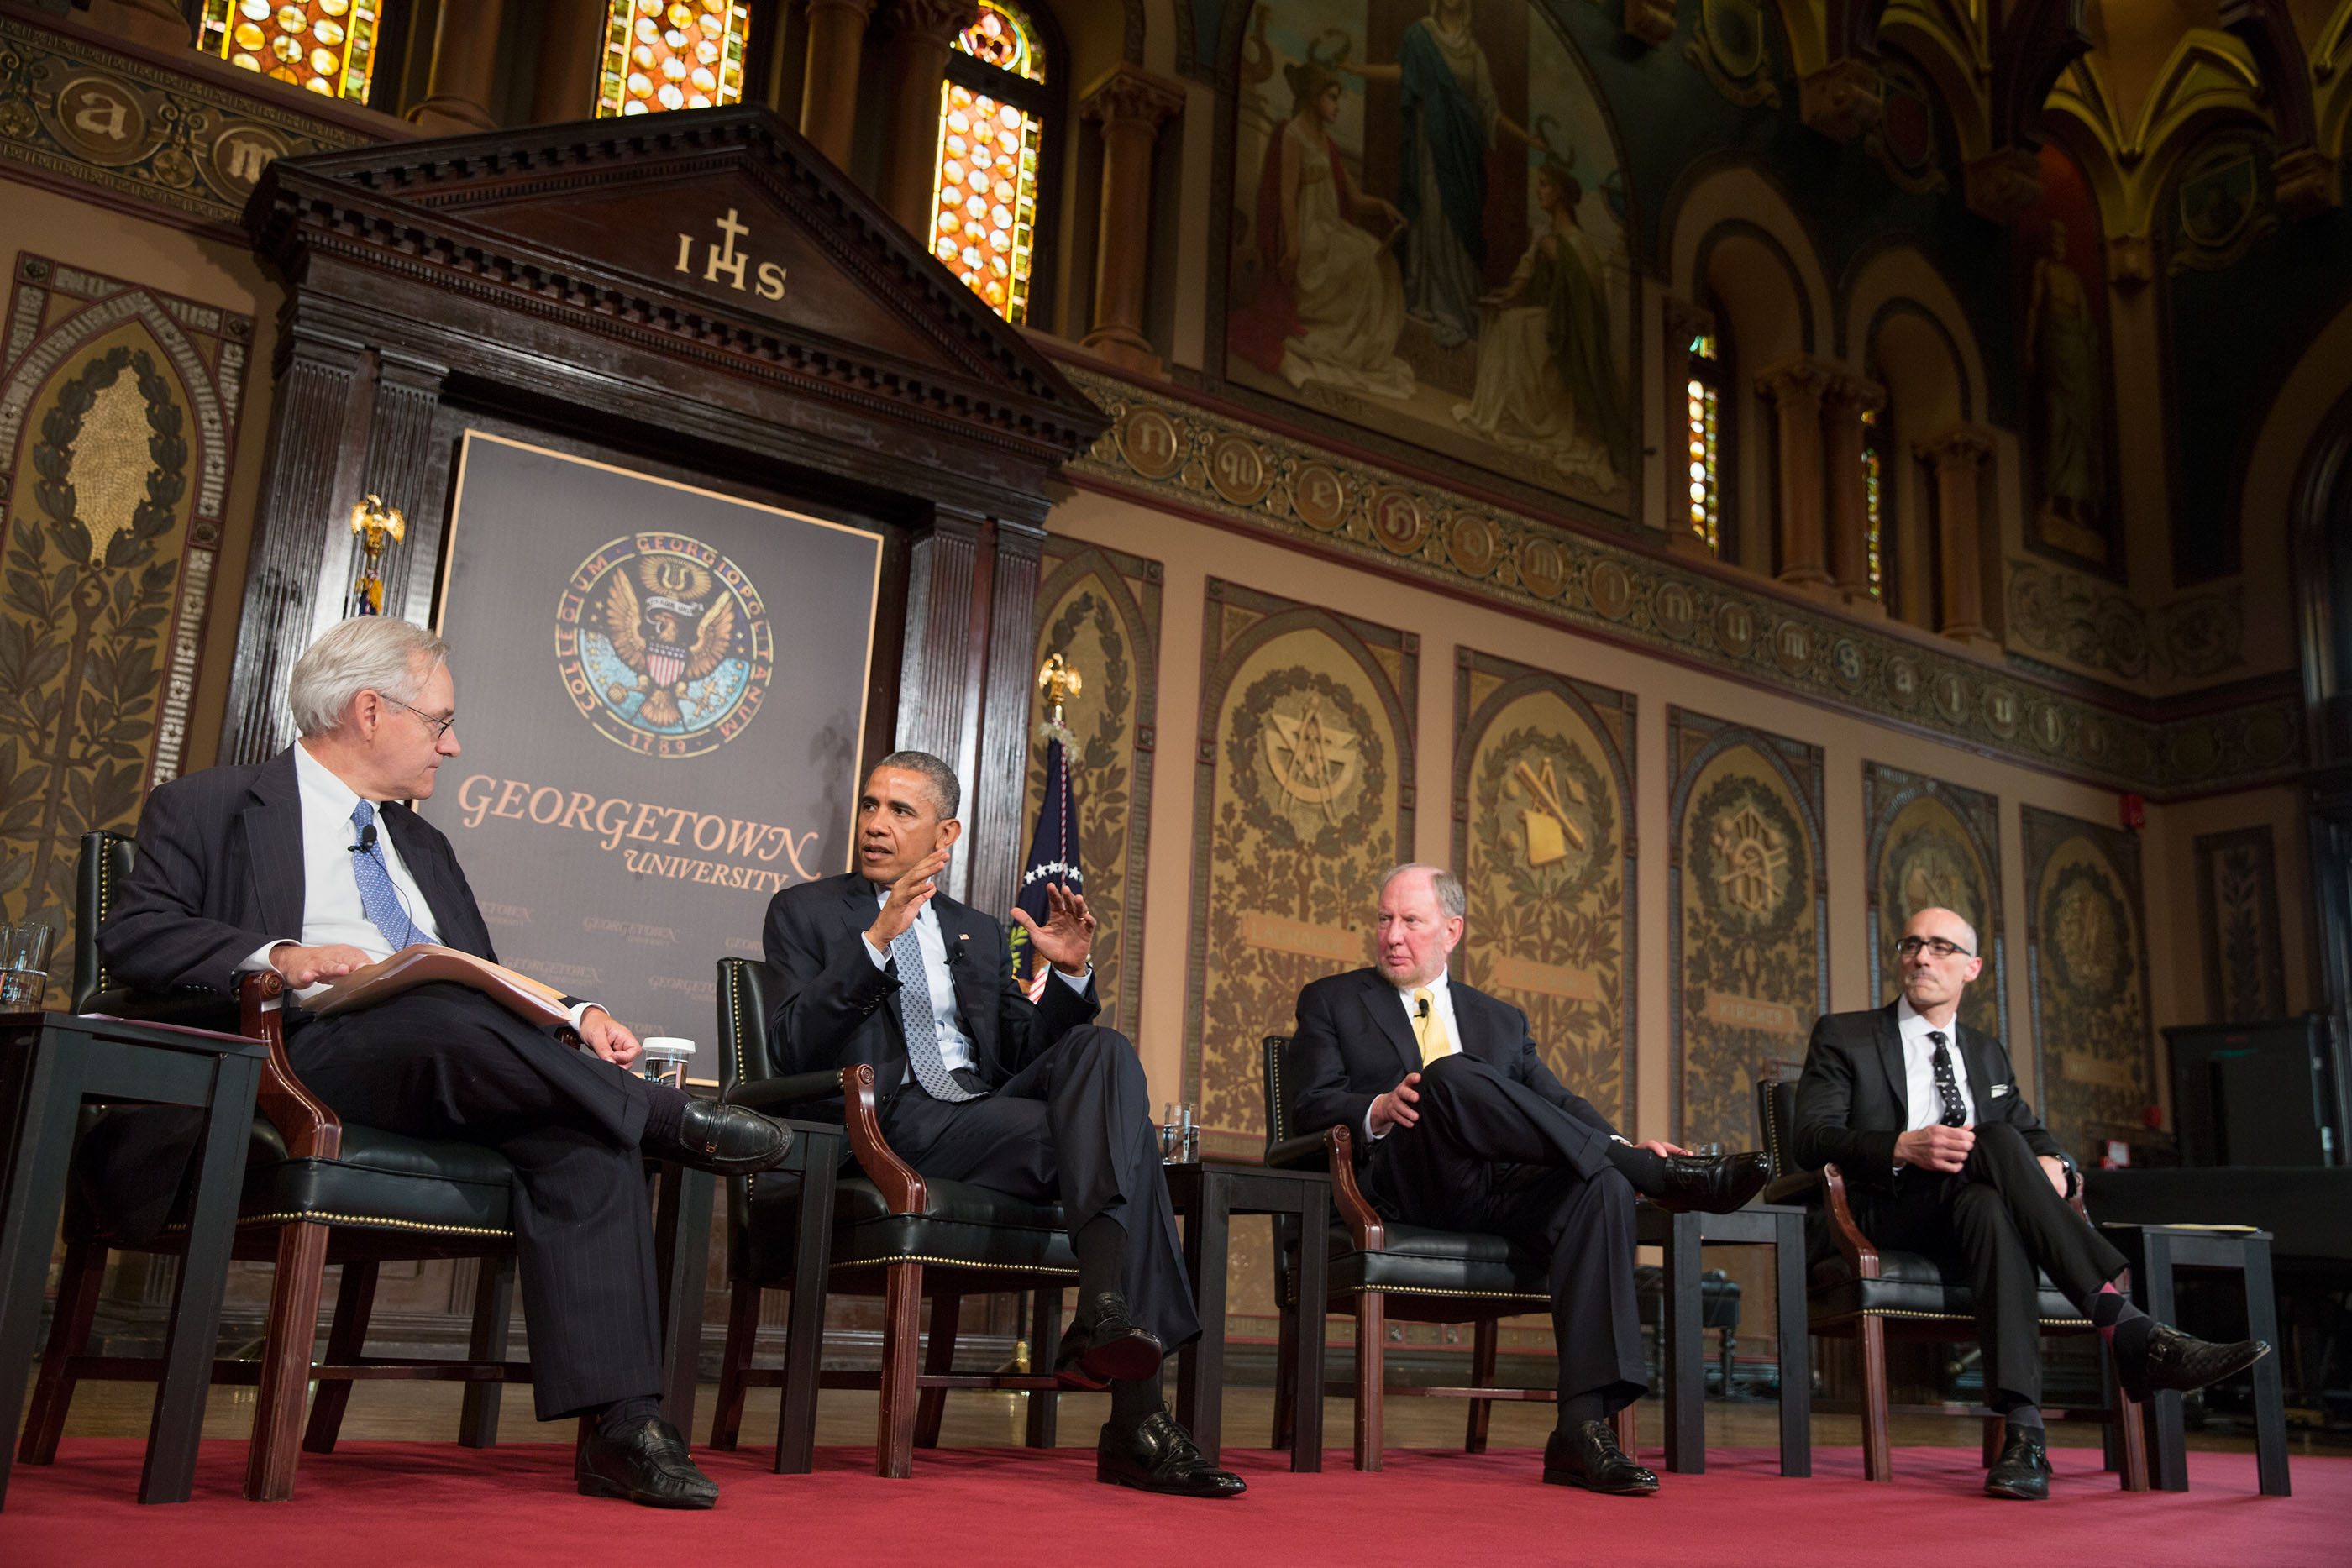 President Barack Obama participates in a discussion about poverty during the Catholic-Evangelical Leadership Summit on Overcoming Poverty